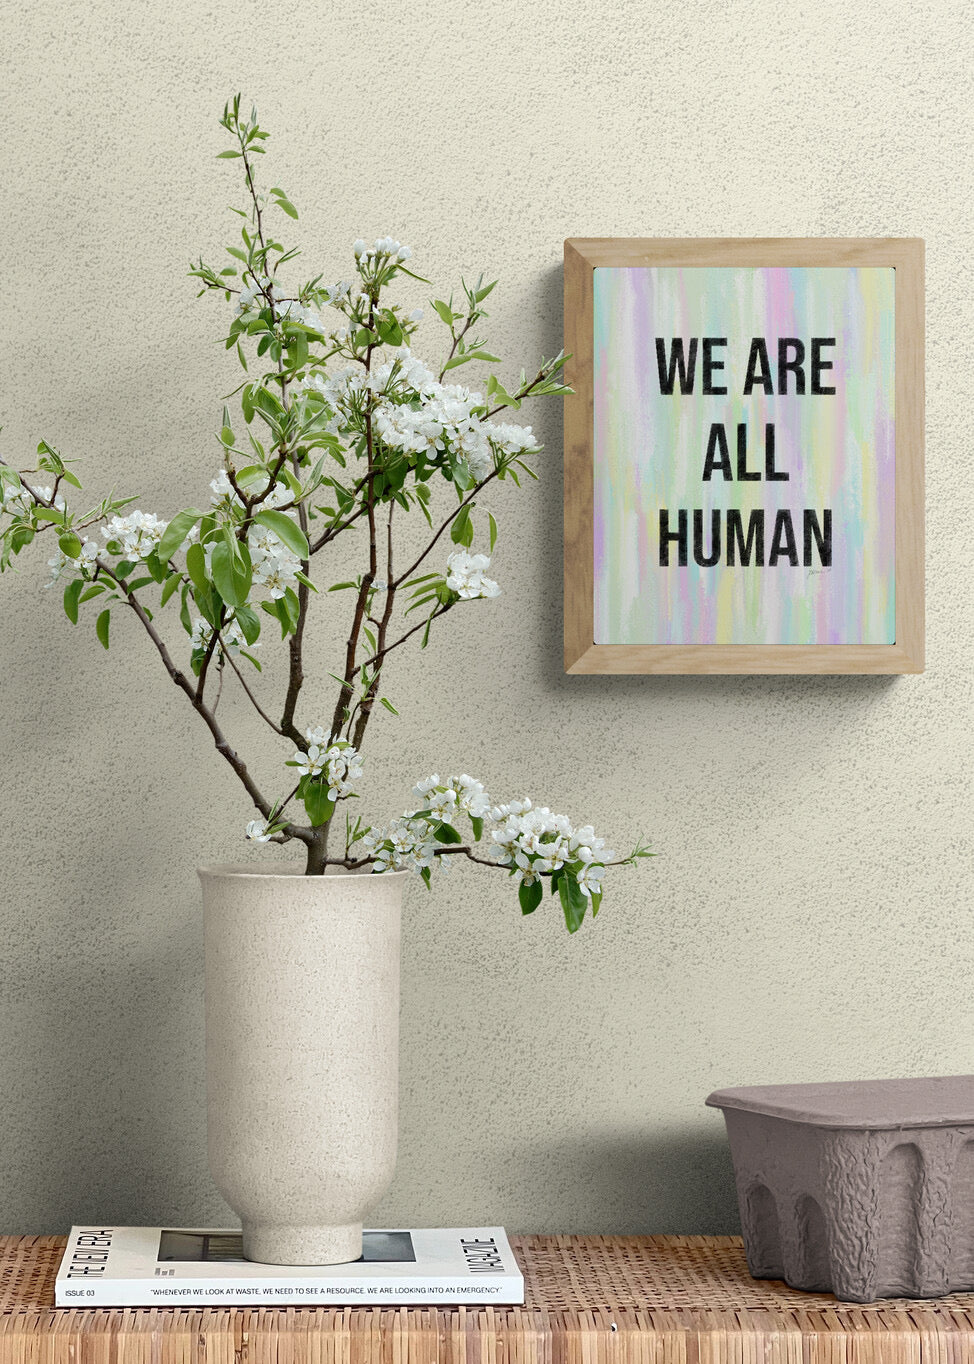 We Are All Human Inspirational Giclée Art Print 8” x 10” with Colorful Abstract Background